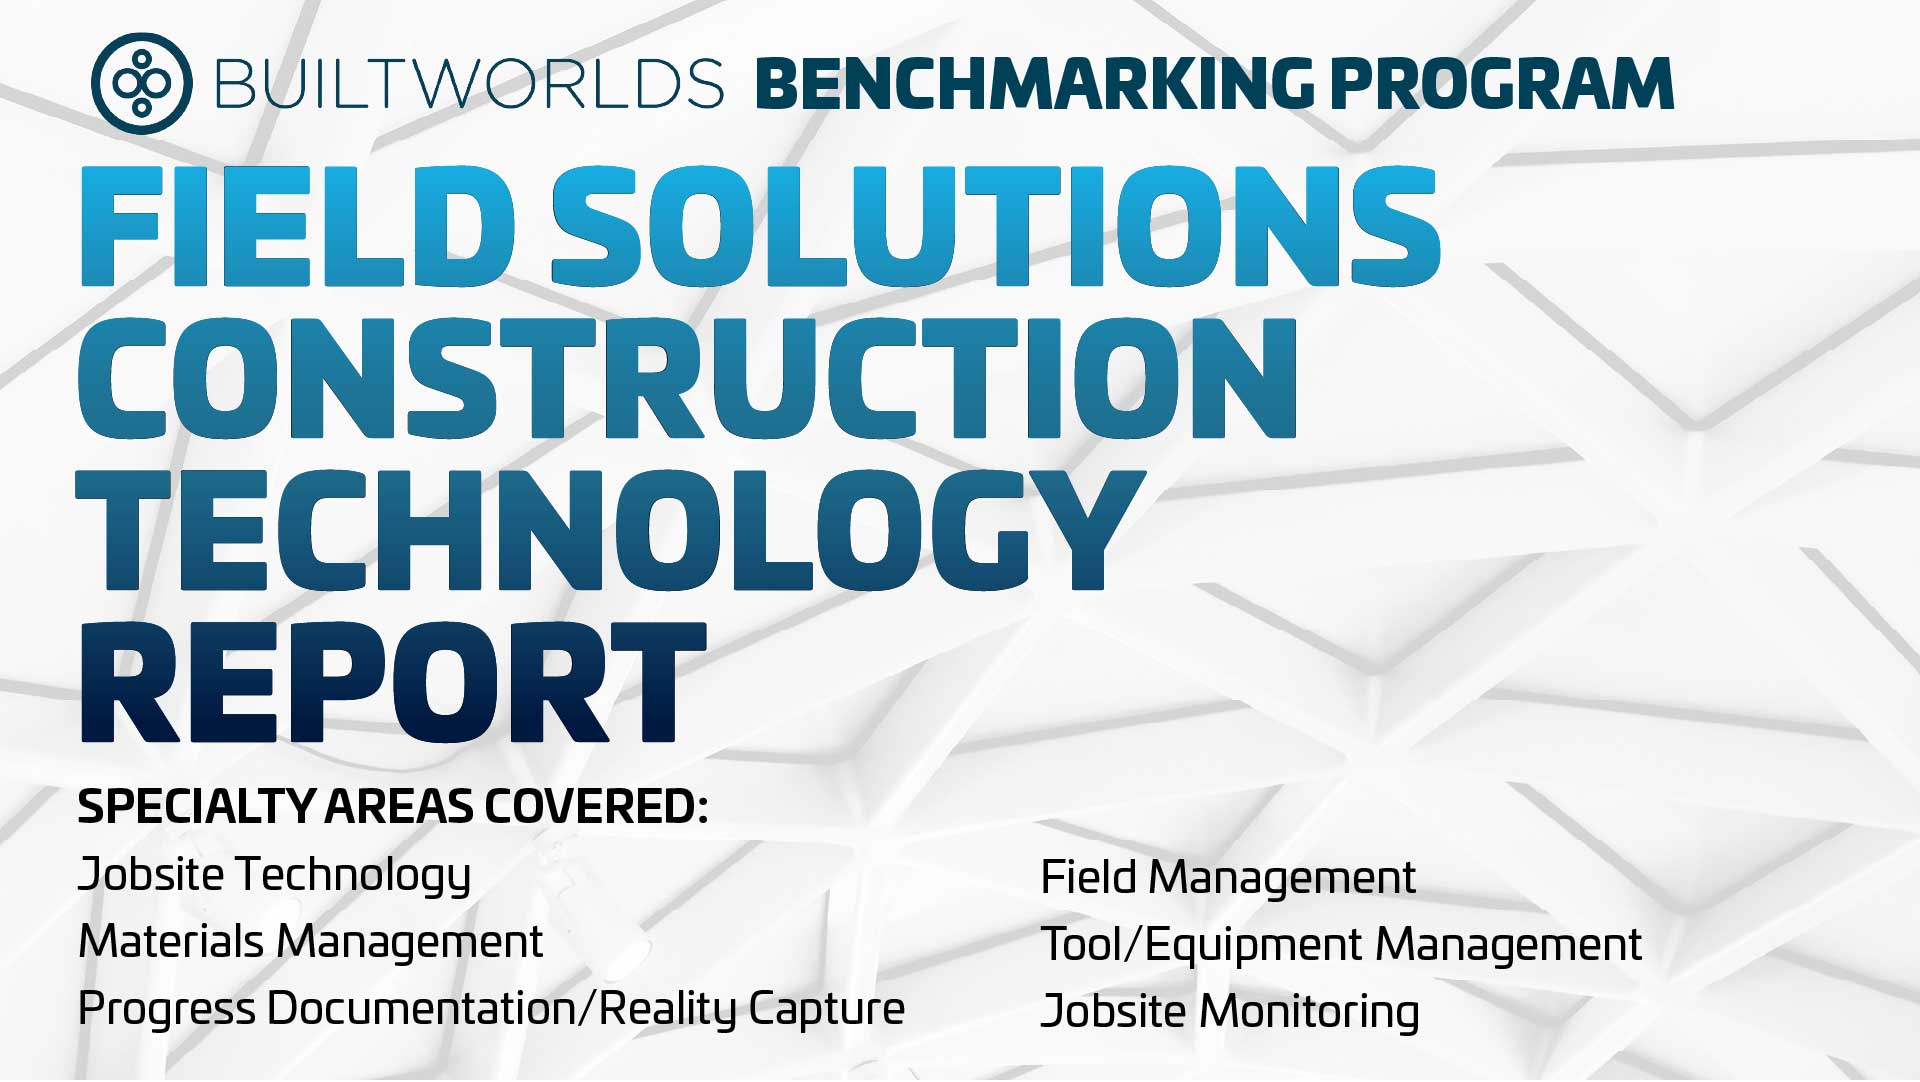 Field Solutions Construction Technology Report